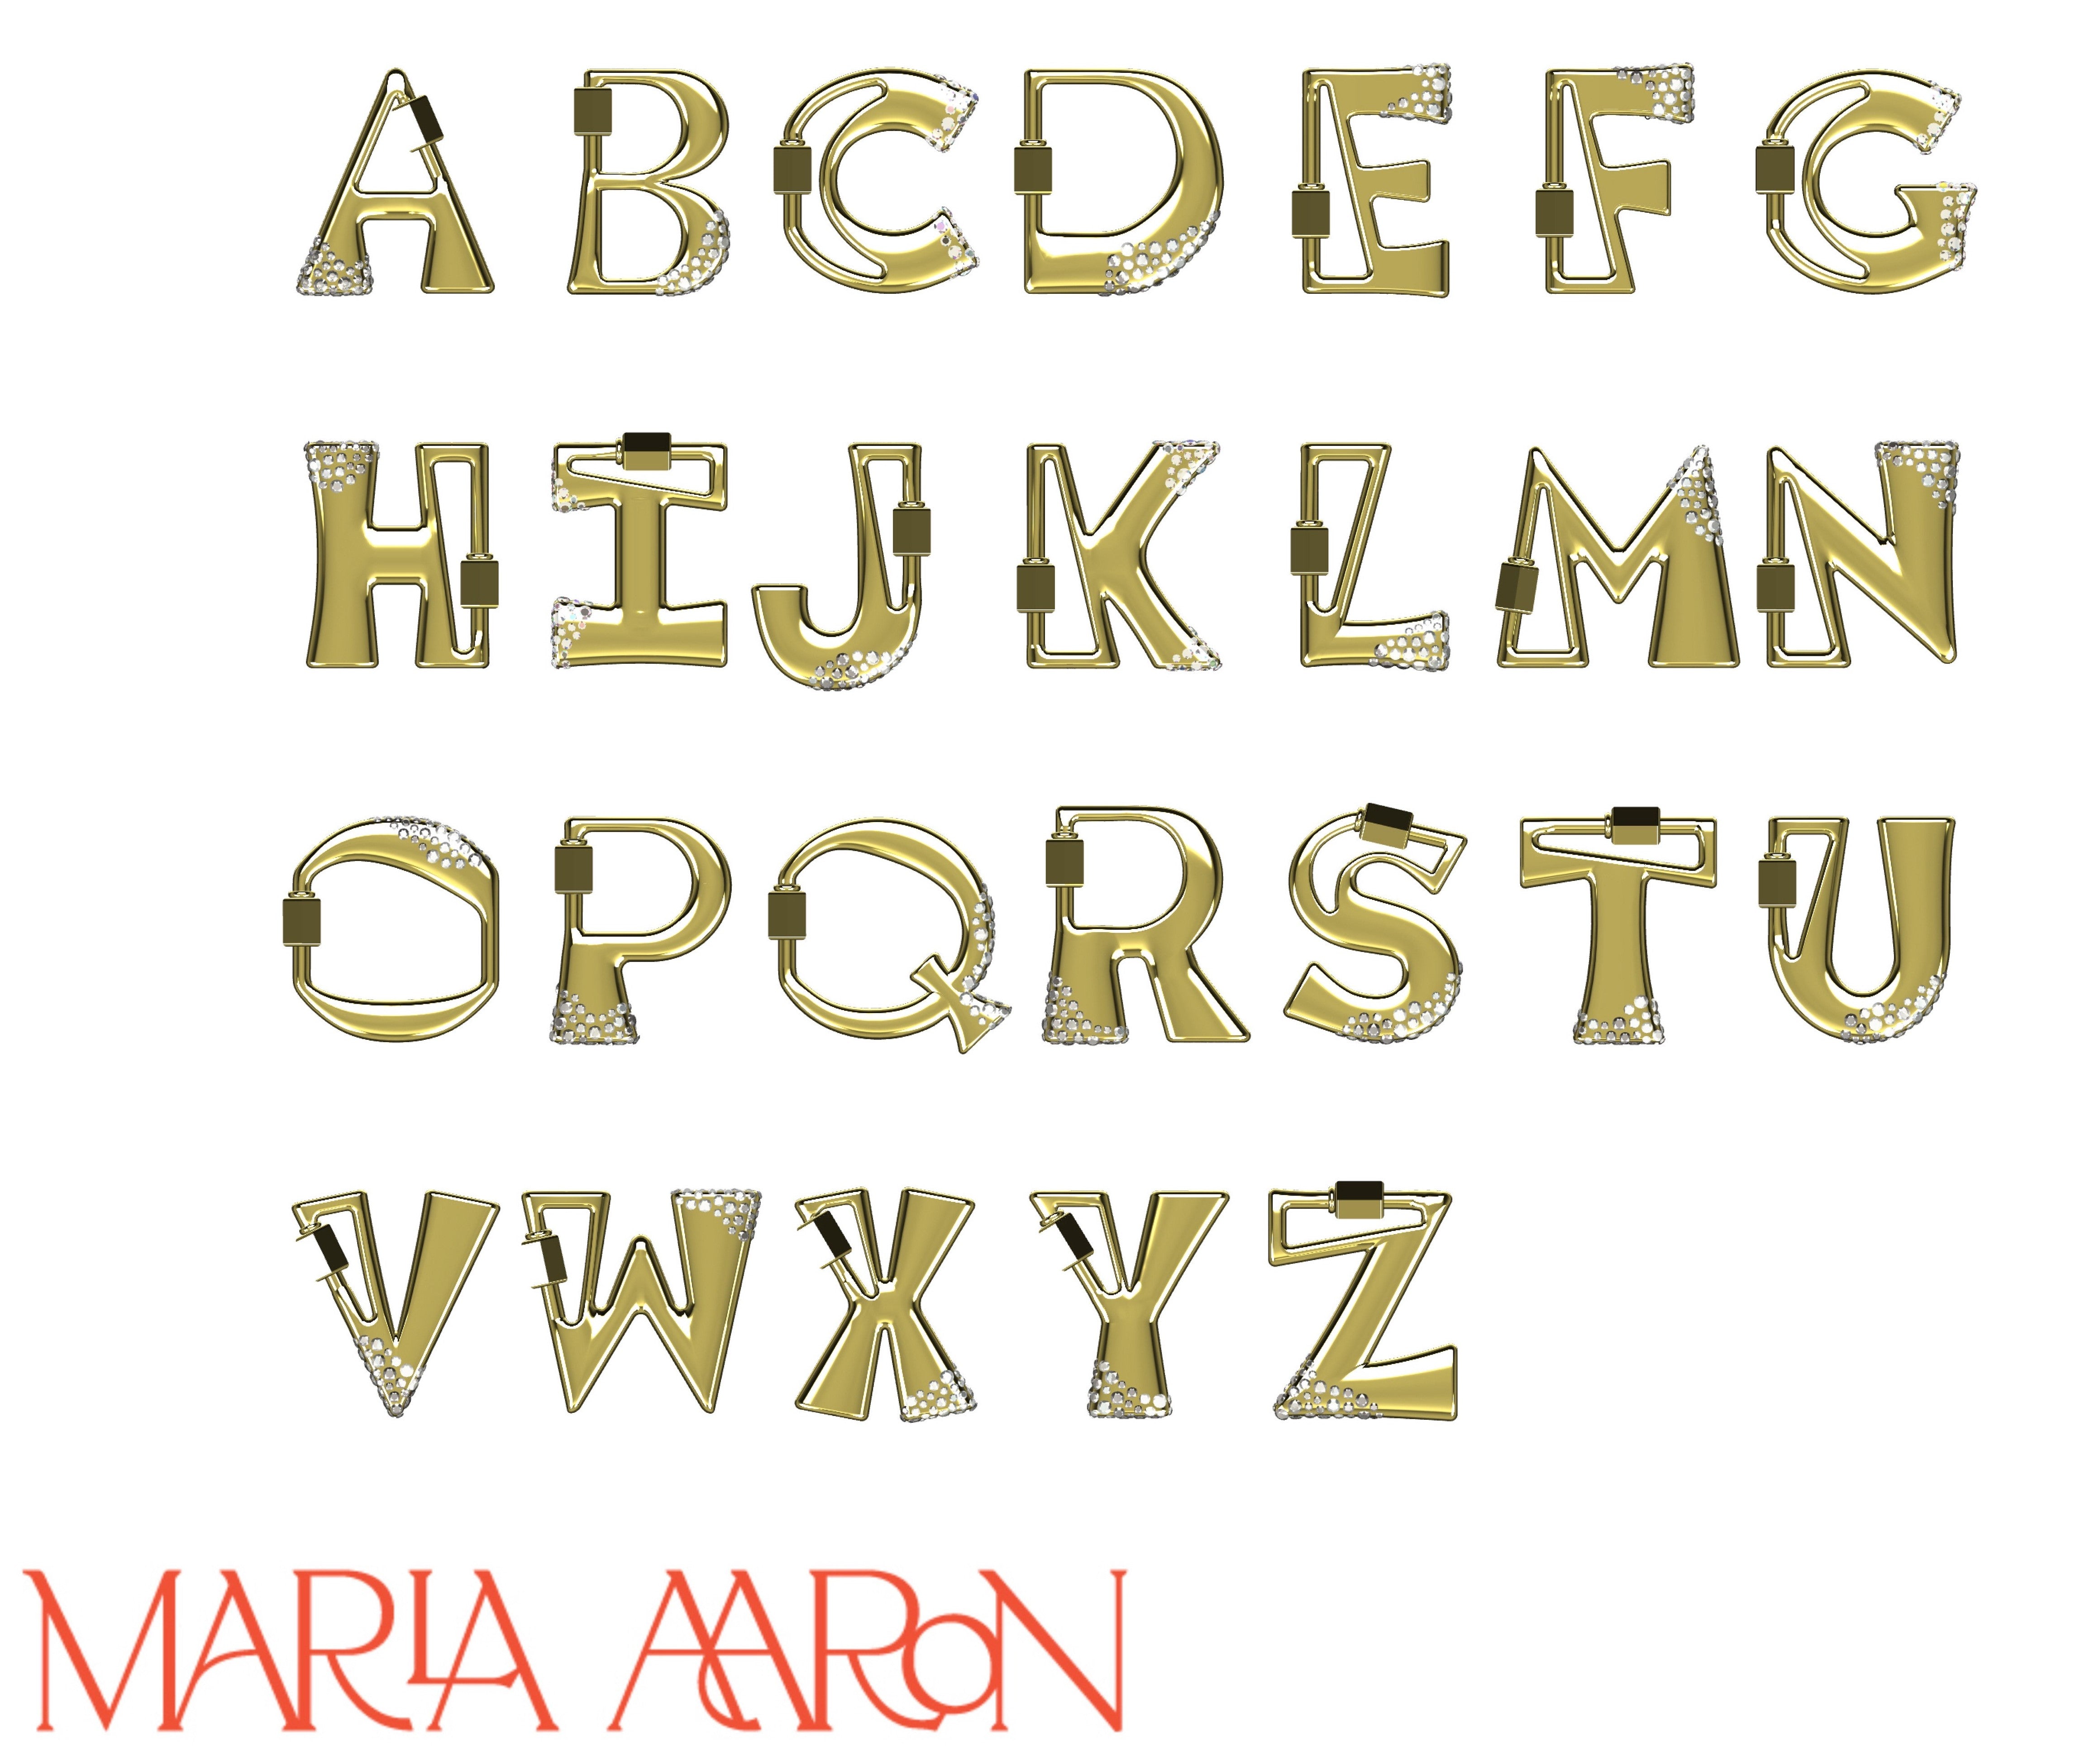 Gold locks of every letter of the alphabet including Z lock against white backdrop with Marla Aaron logo in bottom left corner